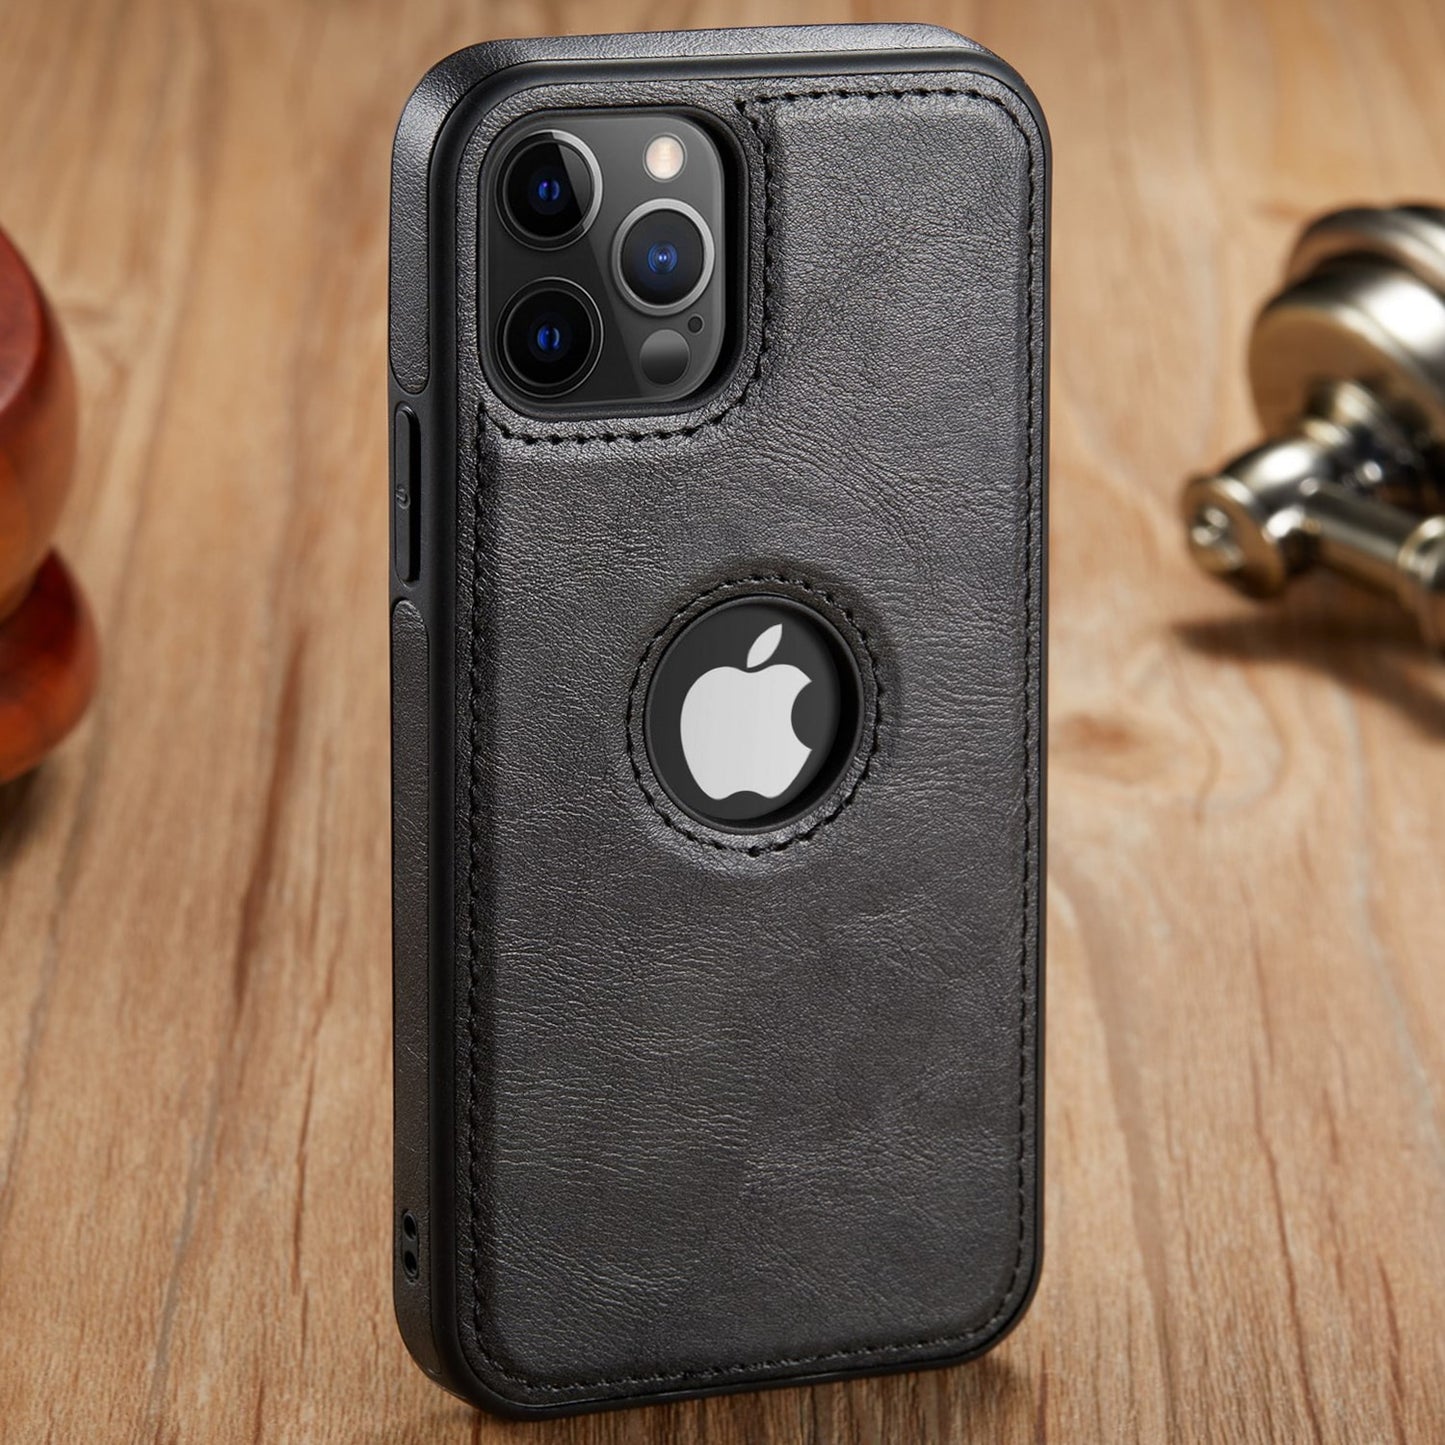 Slim Soft Back Cover Leather iPhone Case